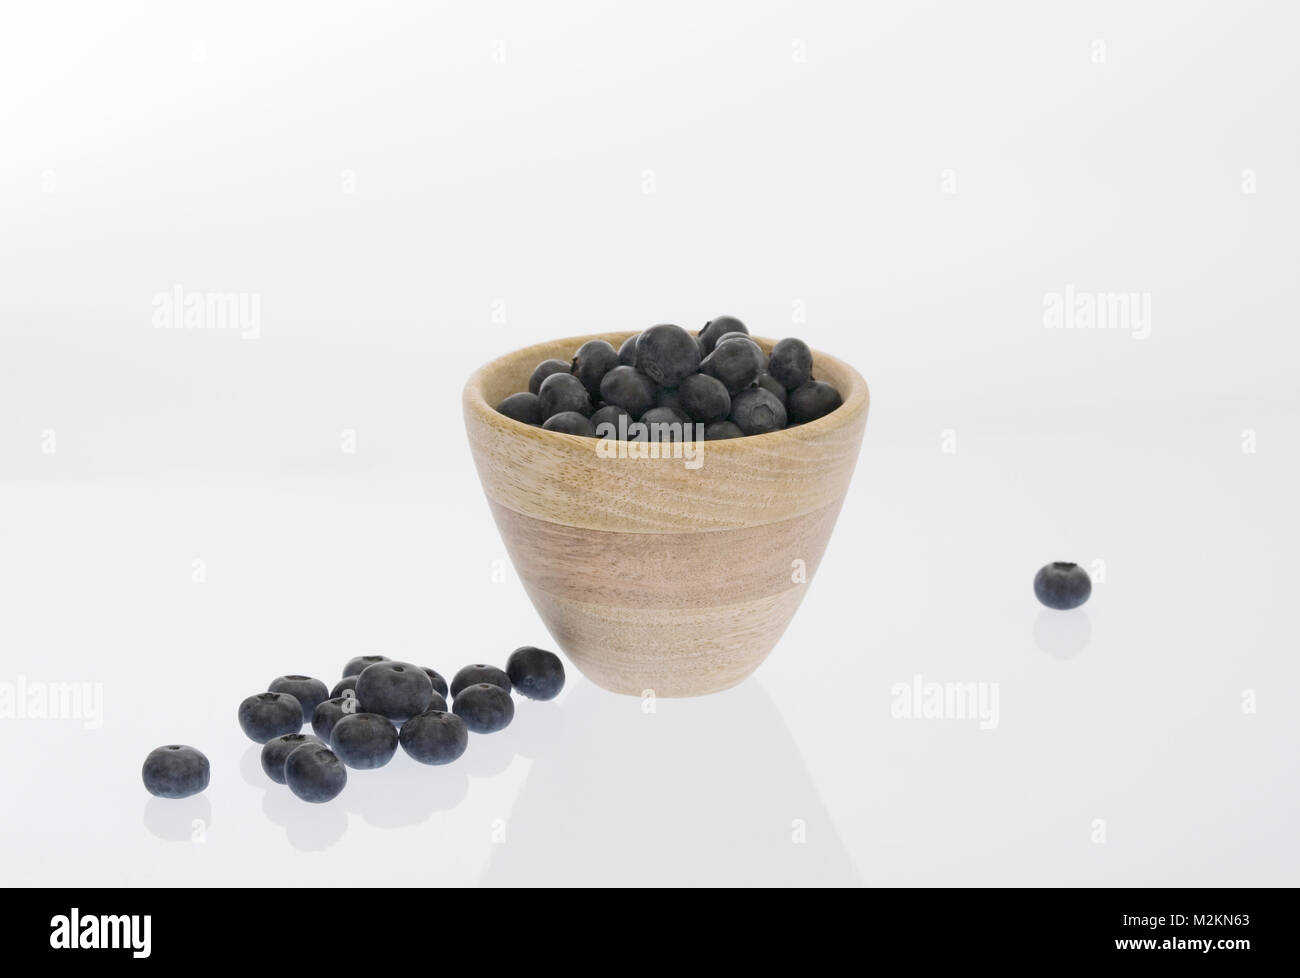 Vaccinium corymbosum. Blueberries in a wooden pot. Stock Photo